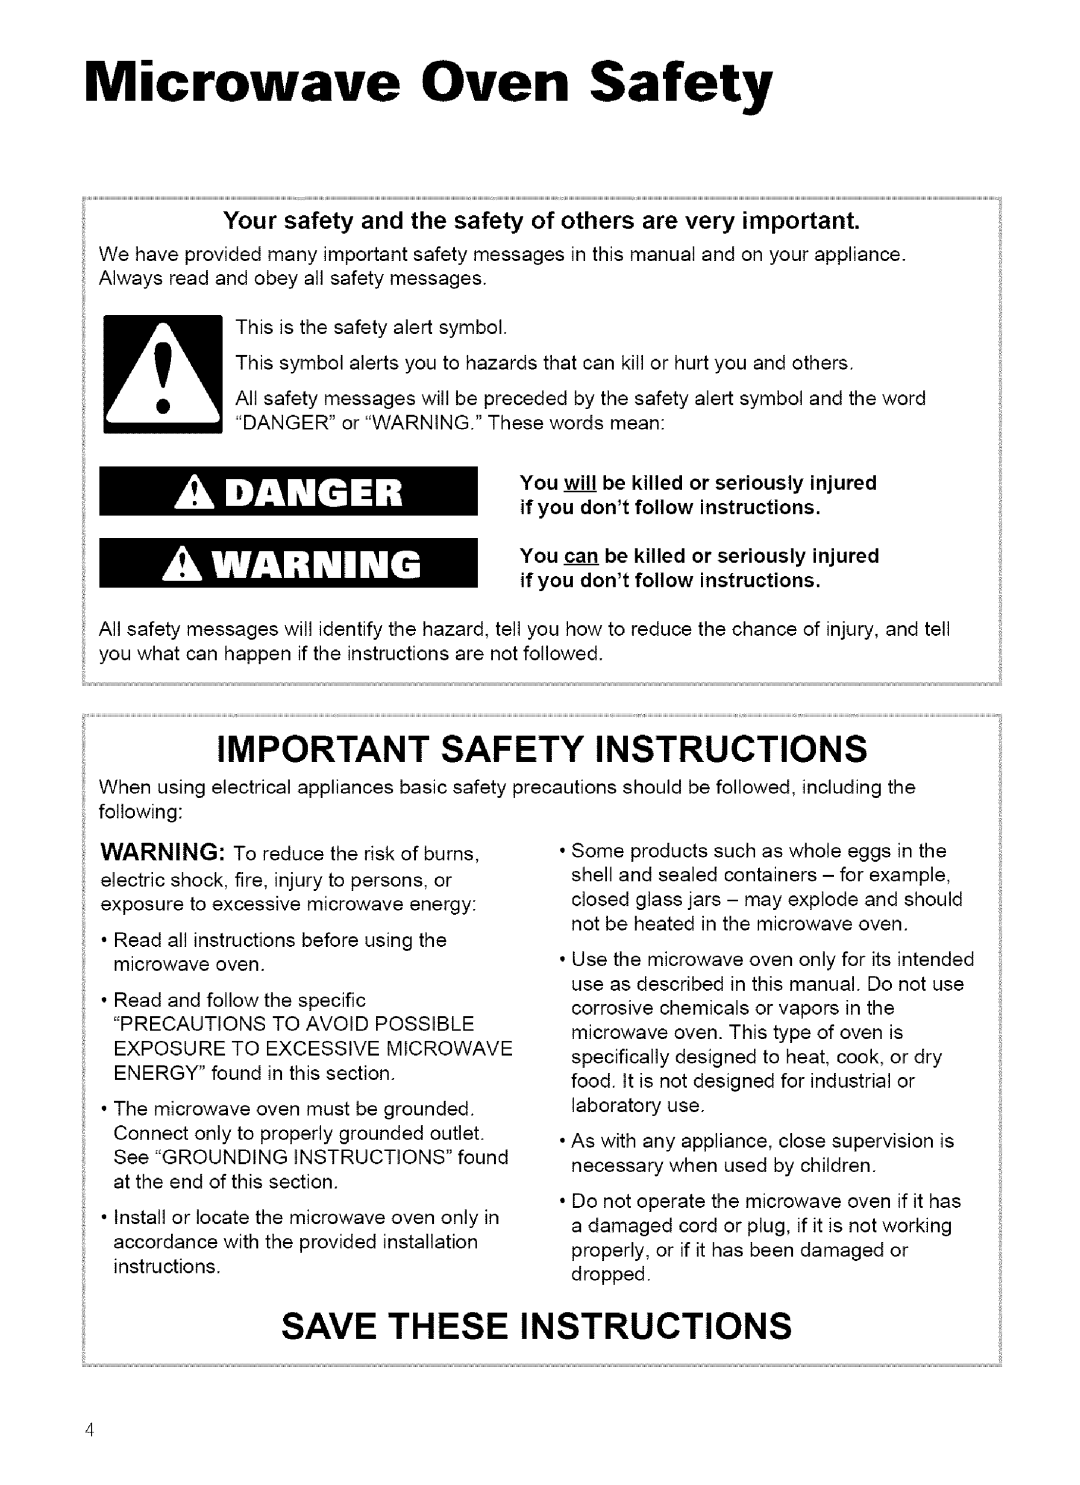 Kenmore 721.62752, 721.62759 manual Microwave Oven Safety, Important Safety Instructions, Save These Instructions 